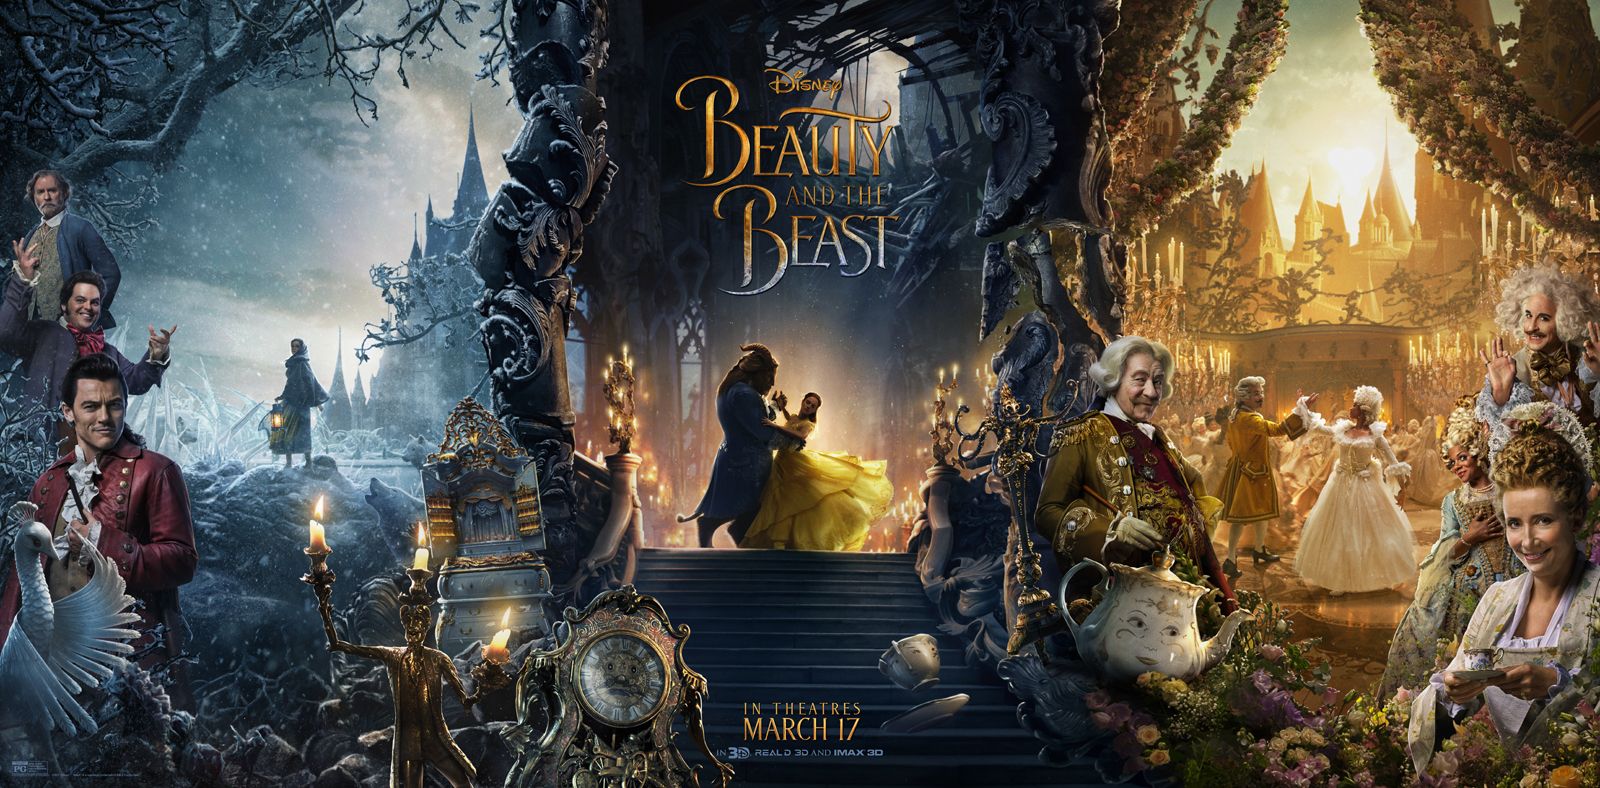 ‘Beauty and the Beast’ Made Me Feel Like a Kid Again. A Review.